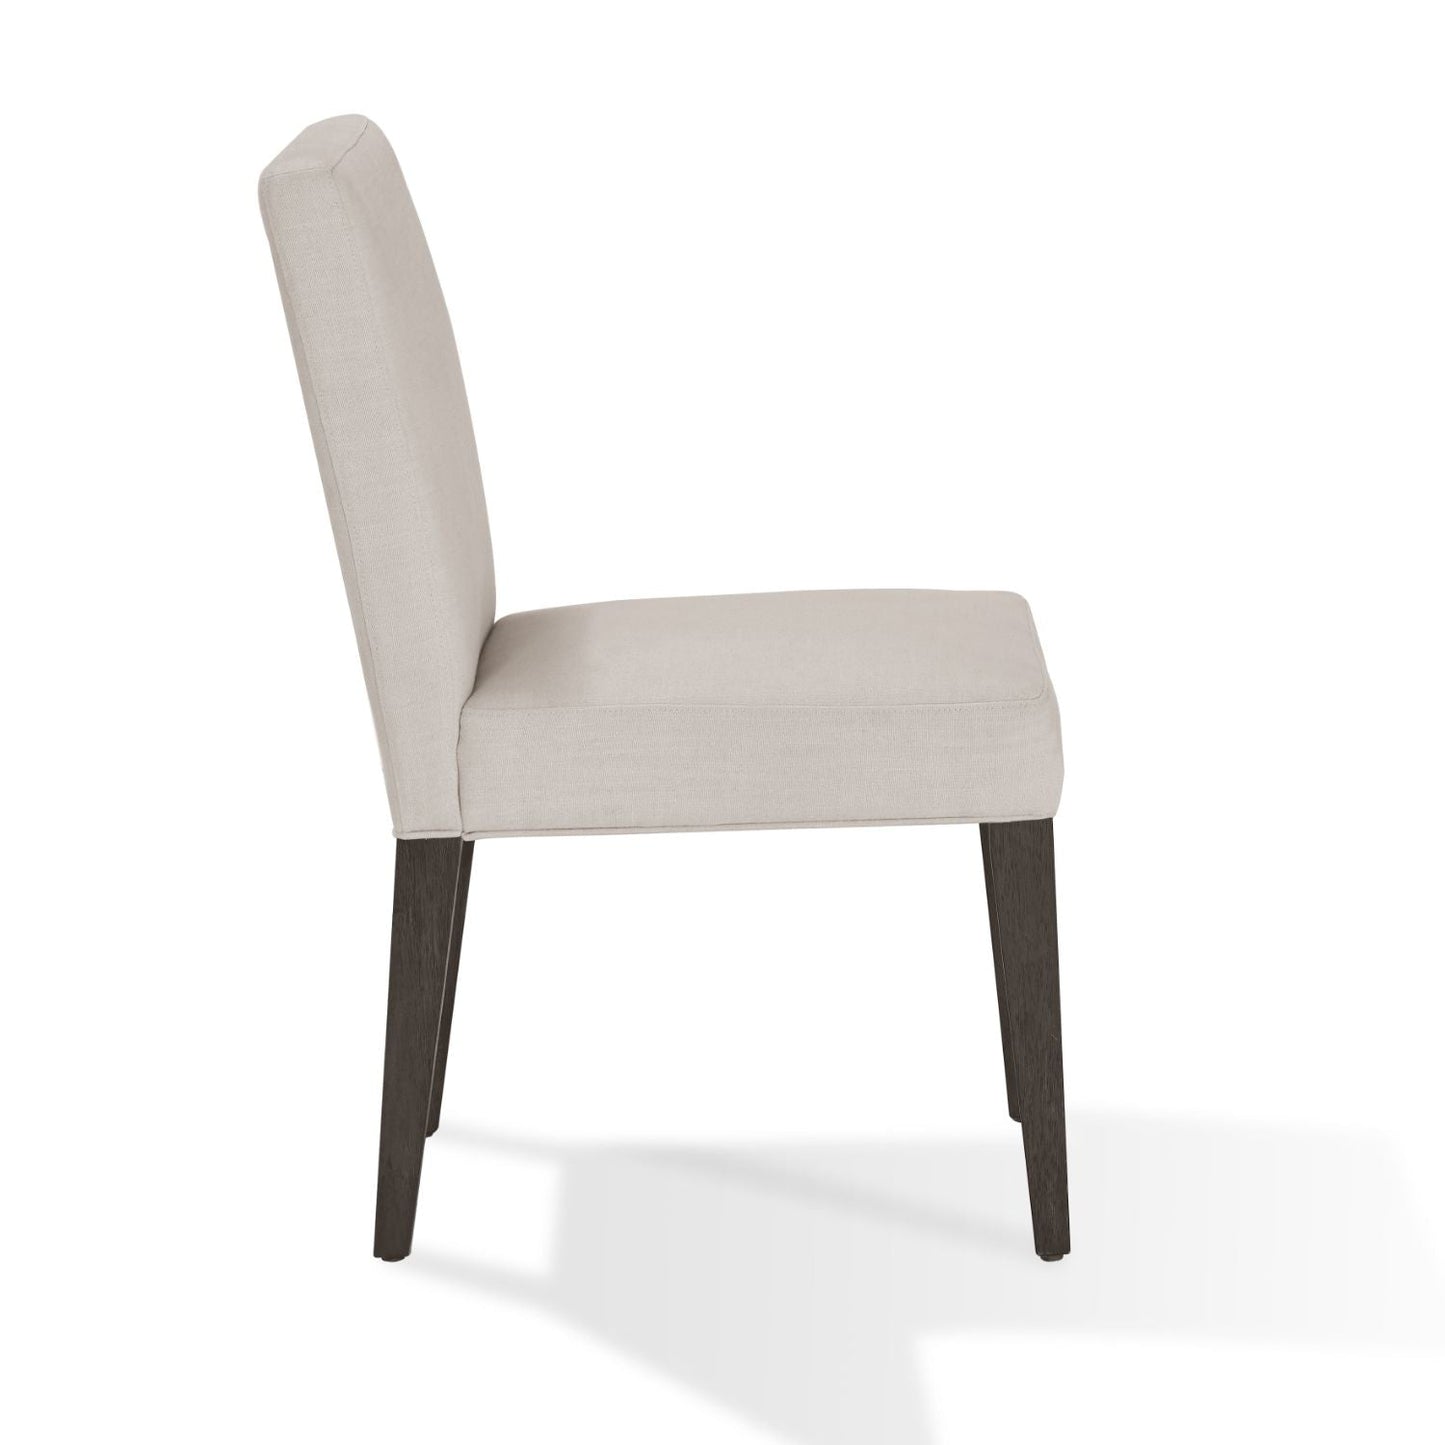 Modus Modesto Upholstered 2 Side Chair in French Roast